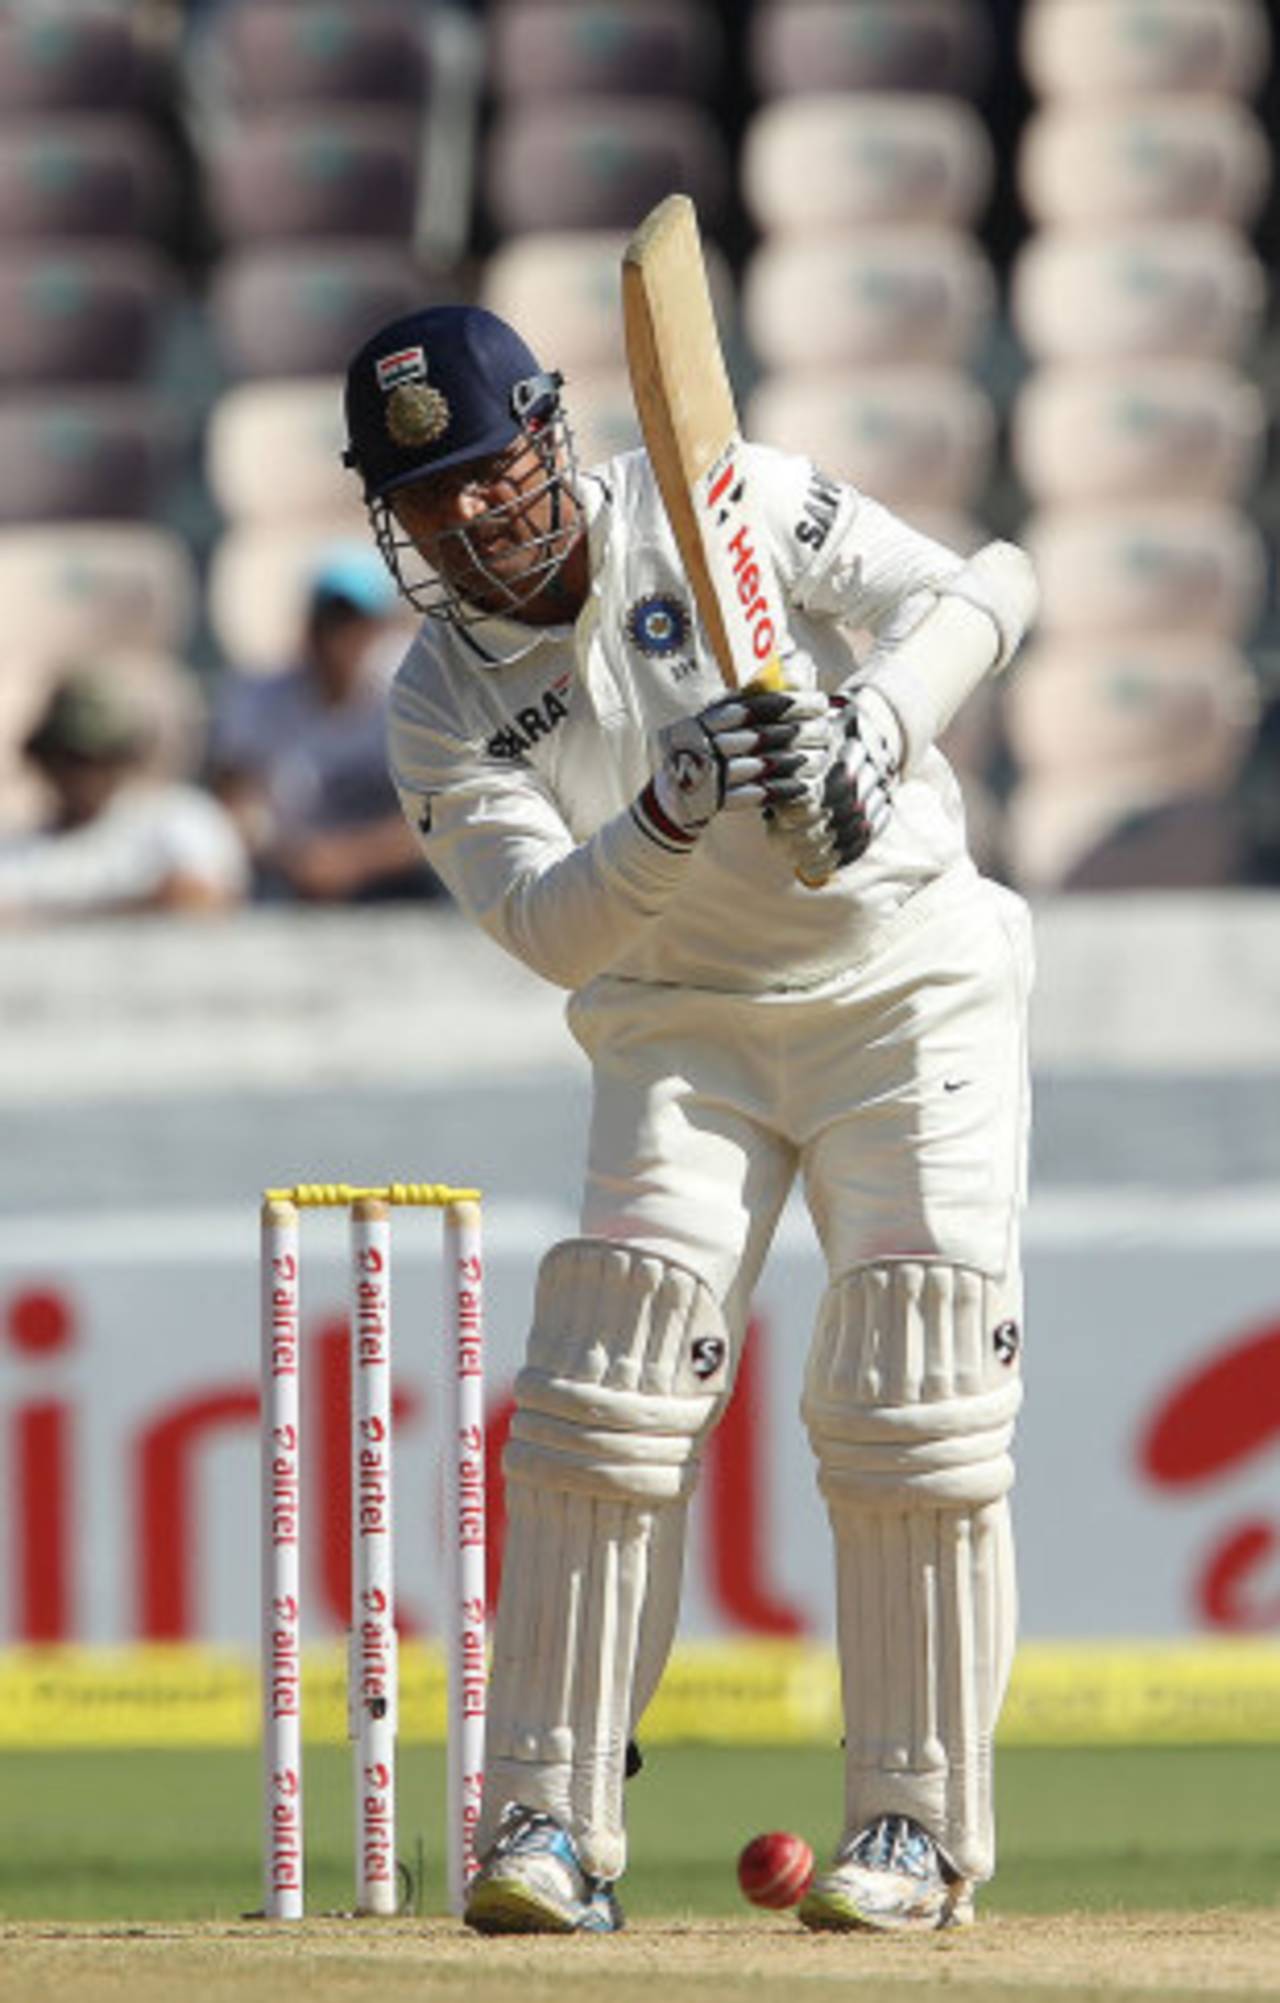 Virender Sehwag was out early on day two for 6, India v Australia, 2nd Test, Hyderabad, 2nd day, March 3, 2013